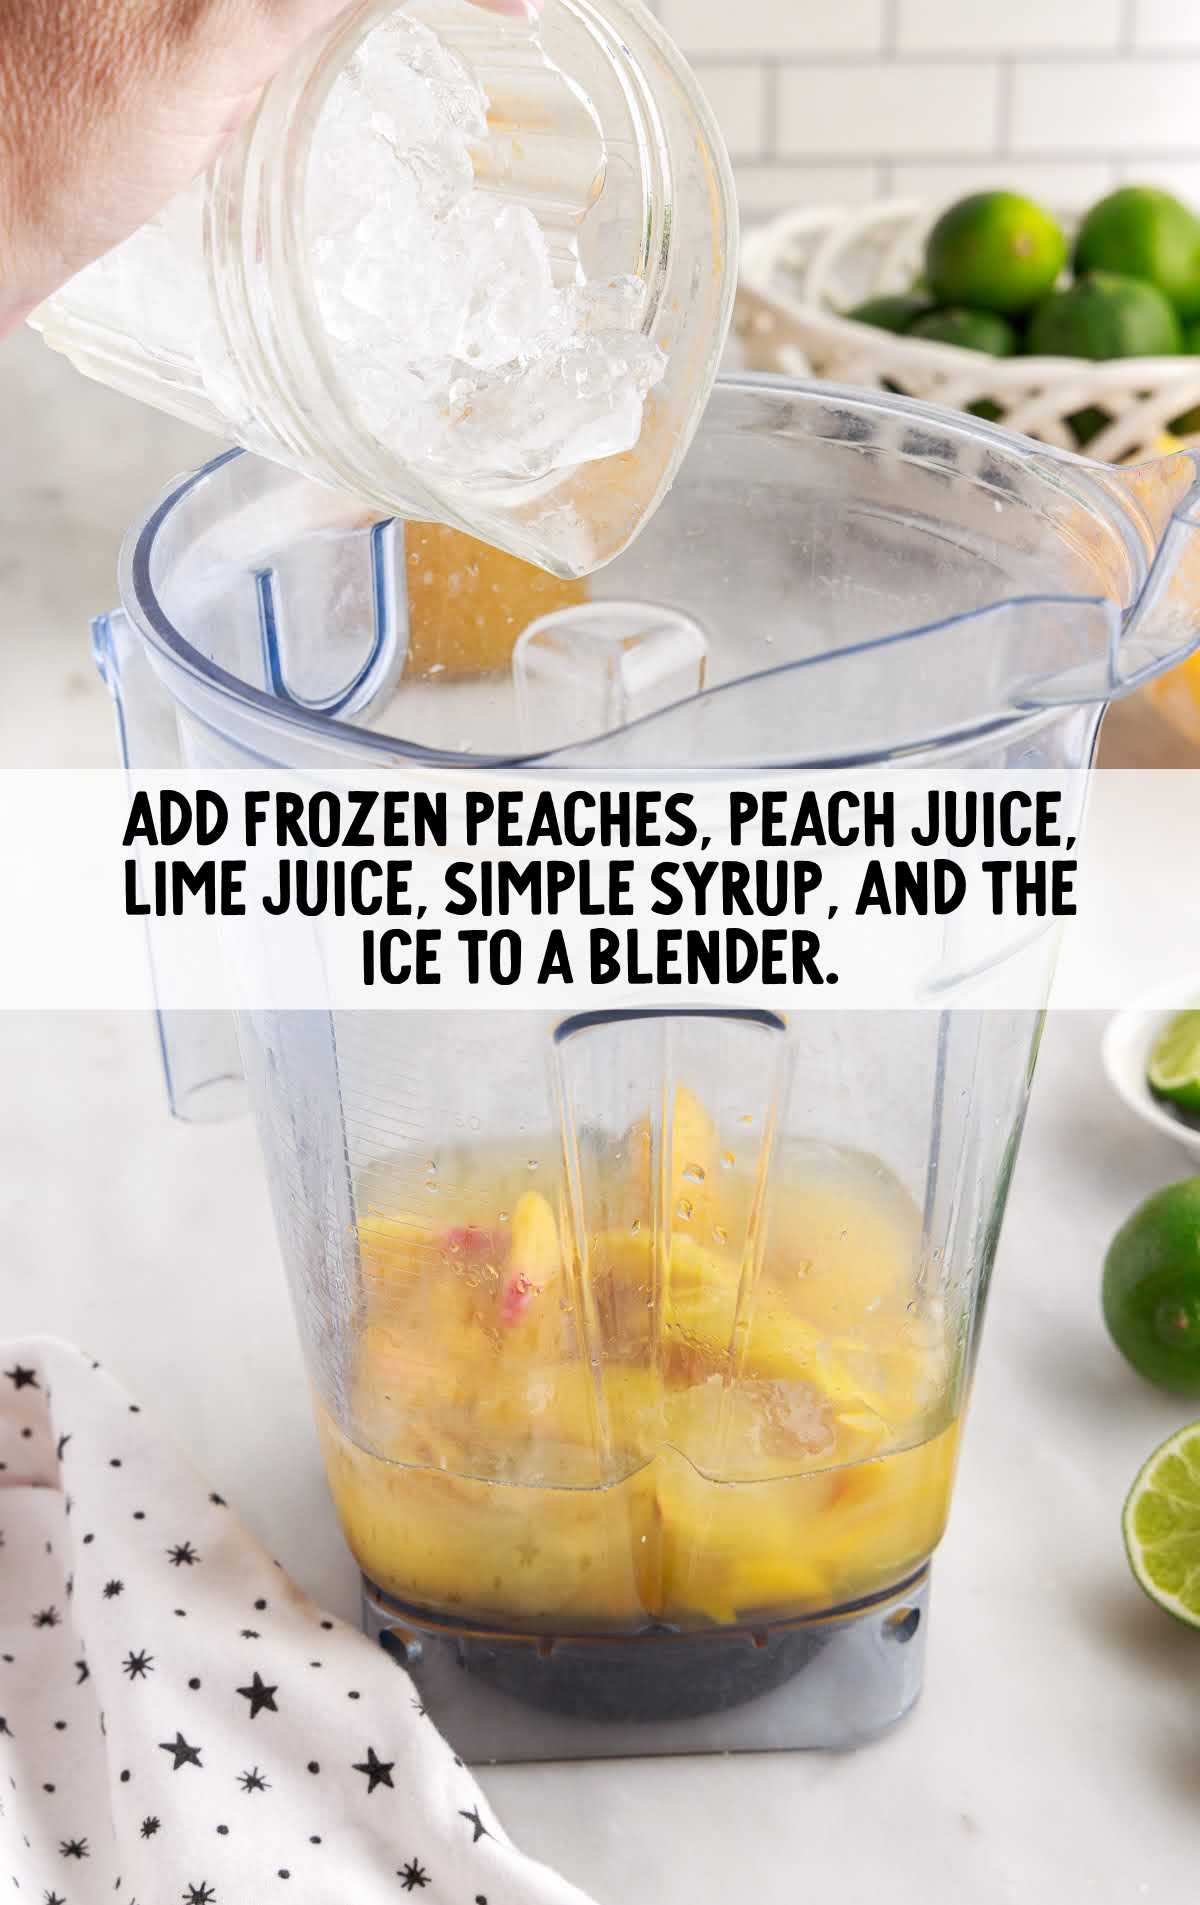 frozen peaches, peach juice, lime juice, simple syrup, and ice added to a blender